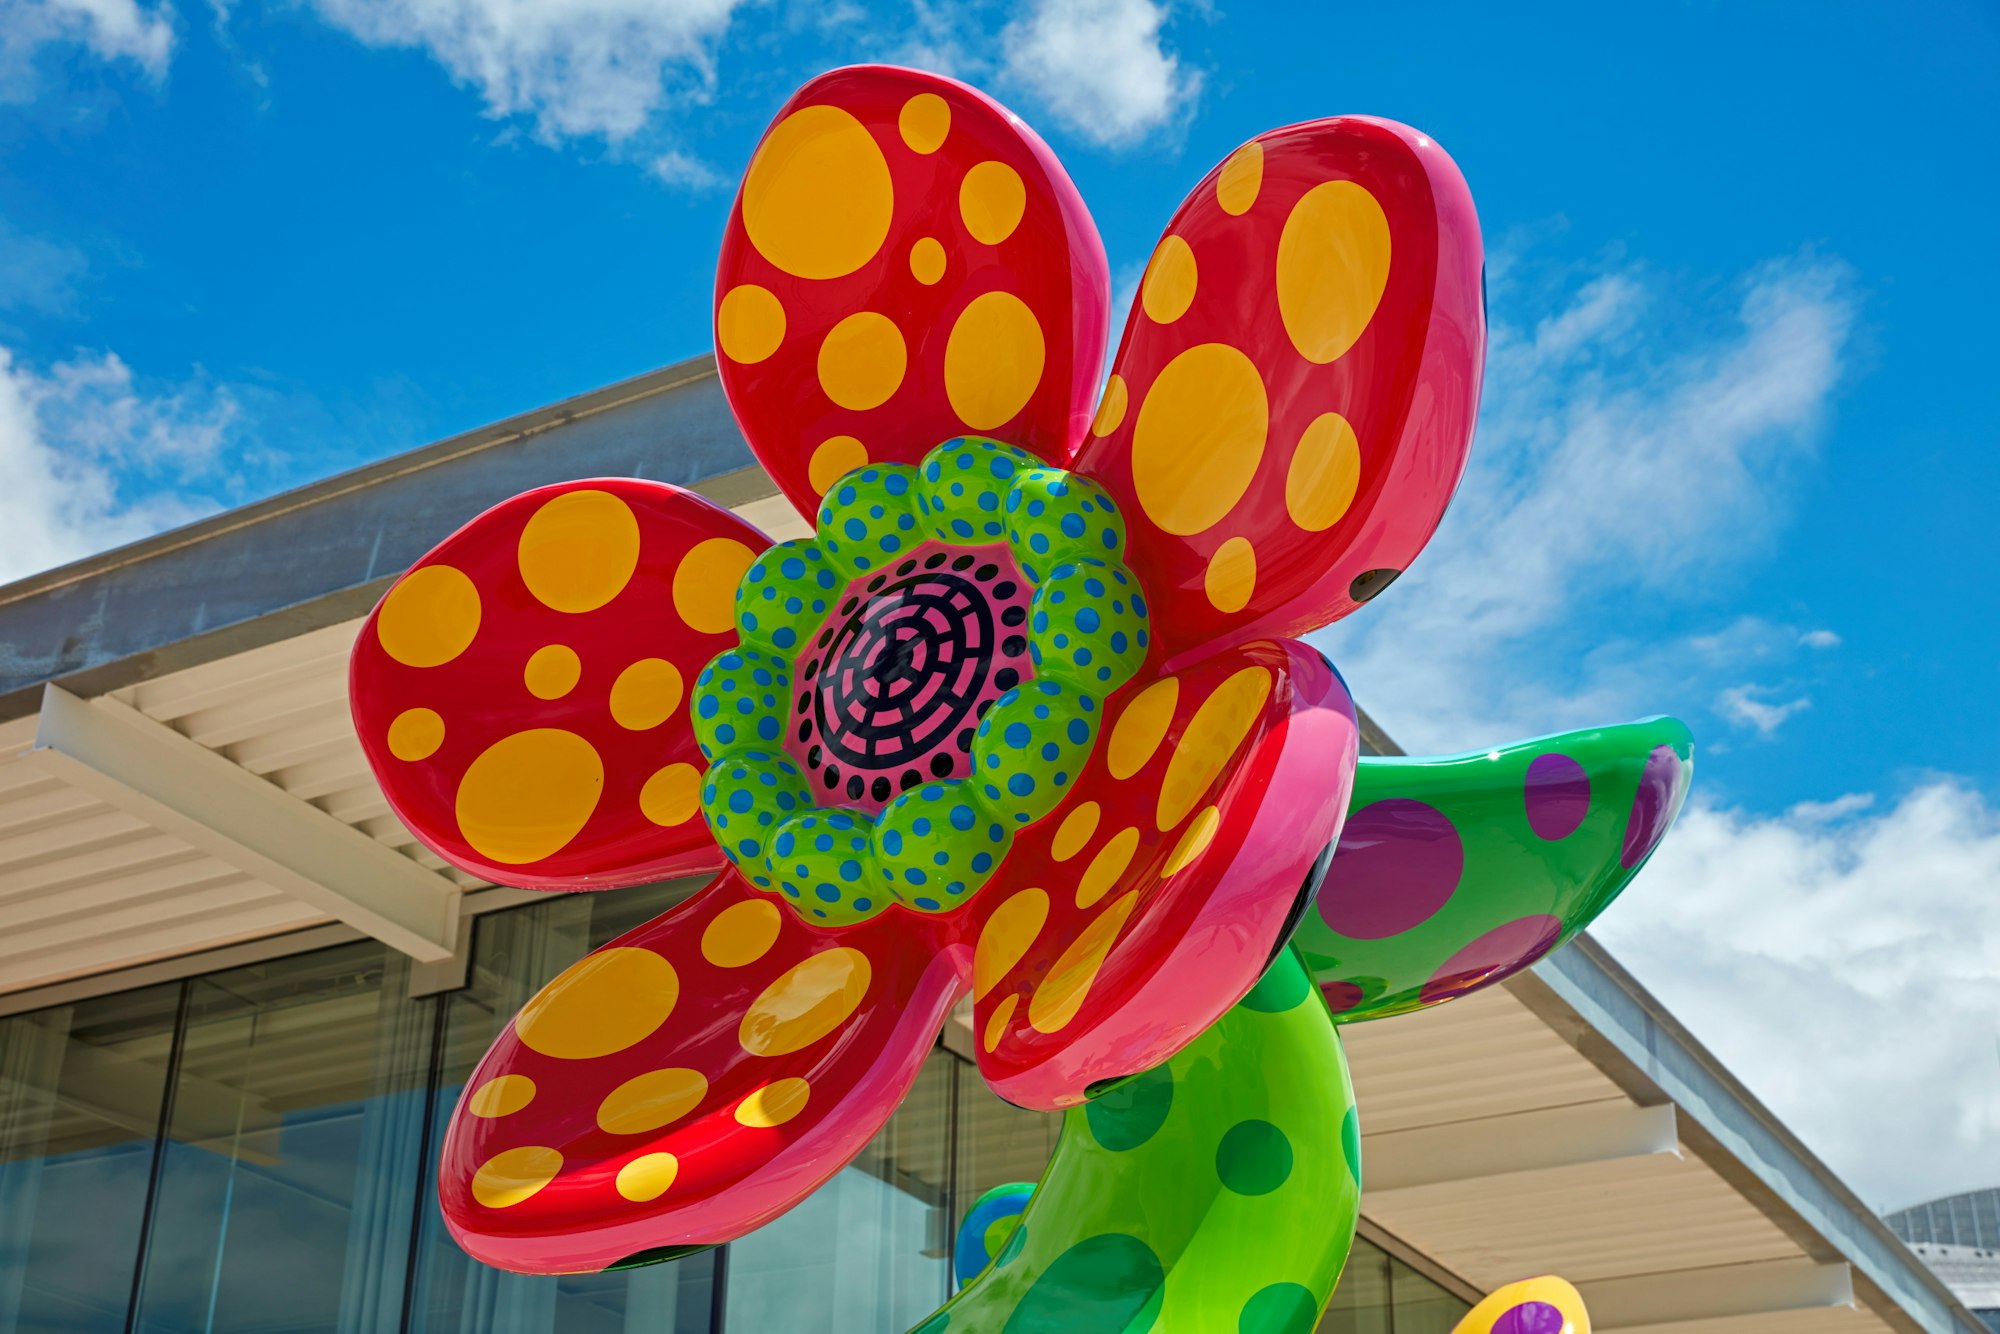 Yayoi Kusama Flowers that Bloom in the Cosmos 2022 (detail), commissioned for the Sydney Modern Project with funds provided by the Art Gallery of New South Wales Foundation and the Gandel Foundation 2022 © Yayoi Kusama